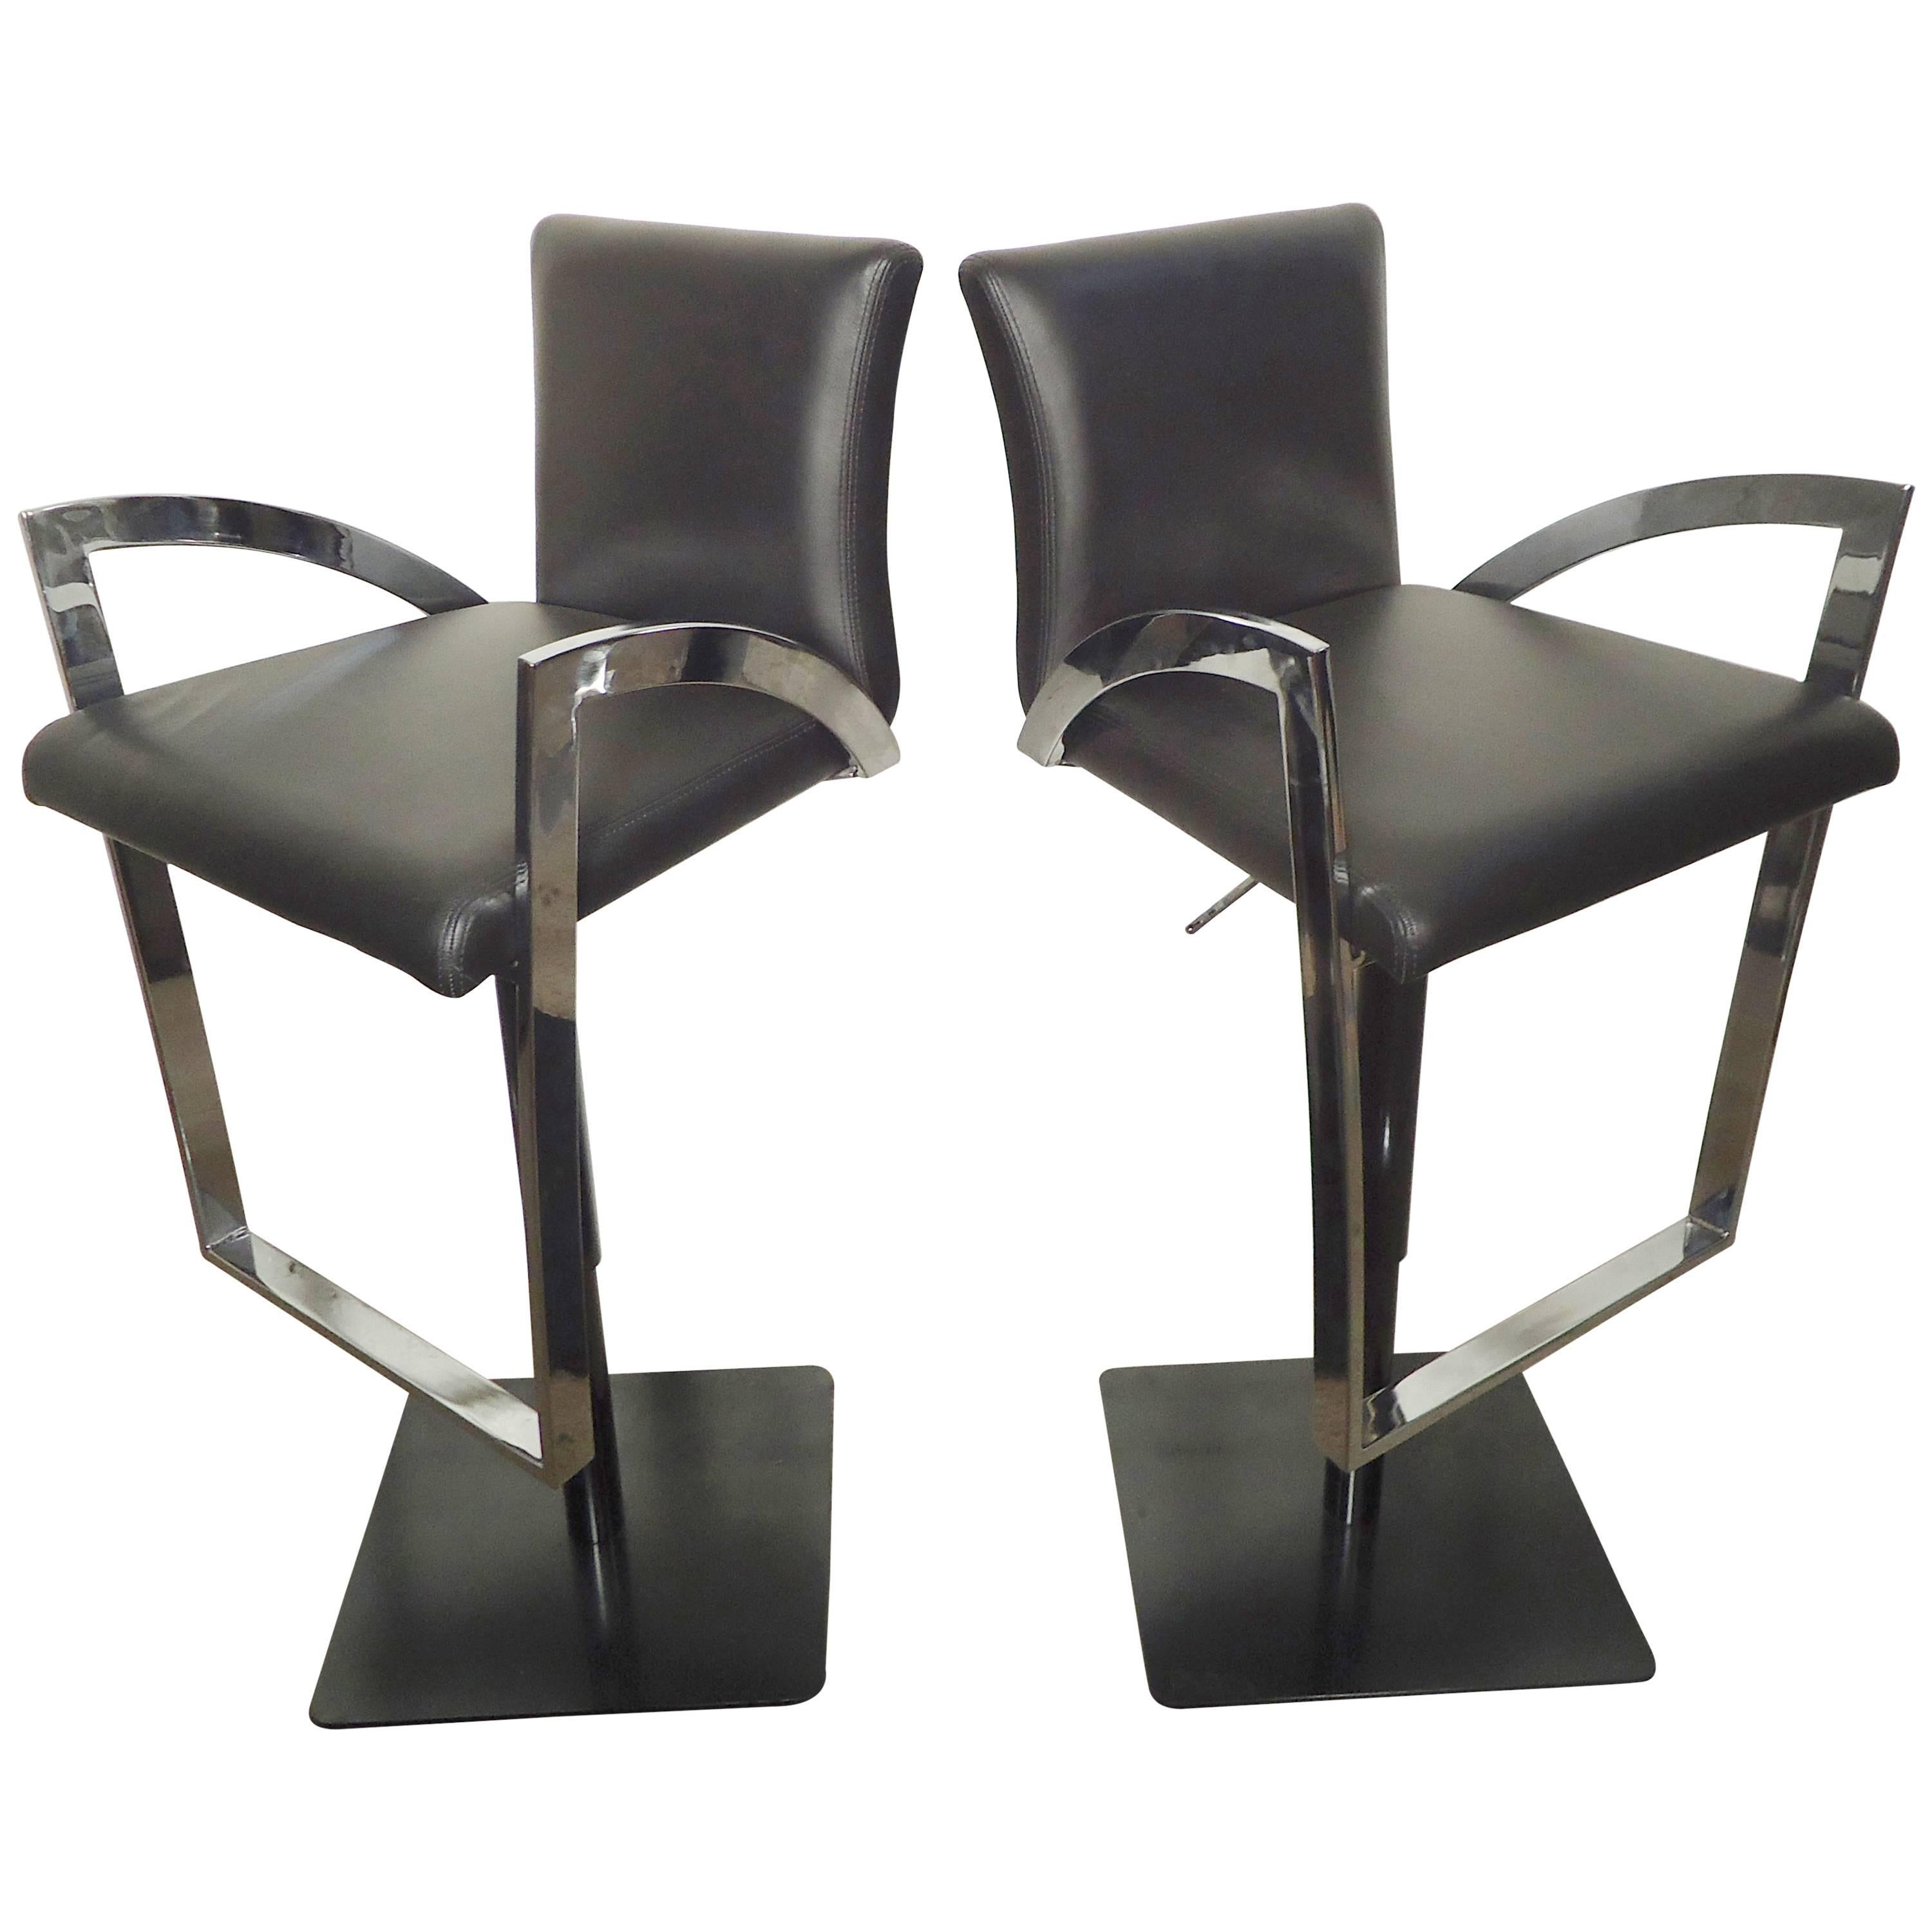 Pair of Mid-Century Modern Style Chrome and Leather Stools